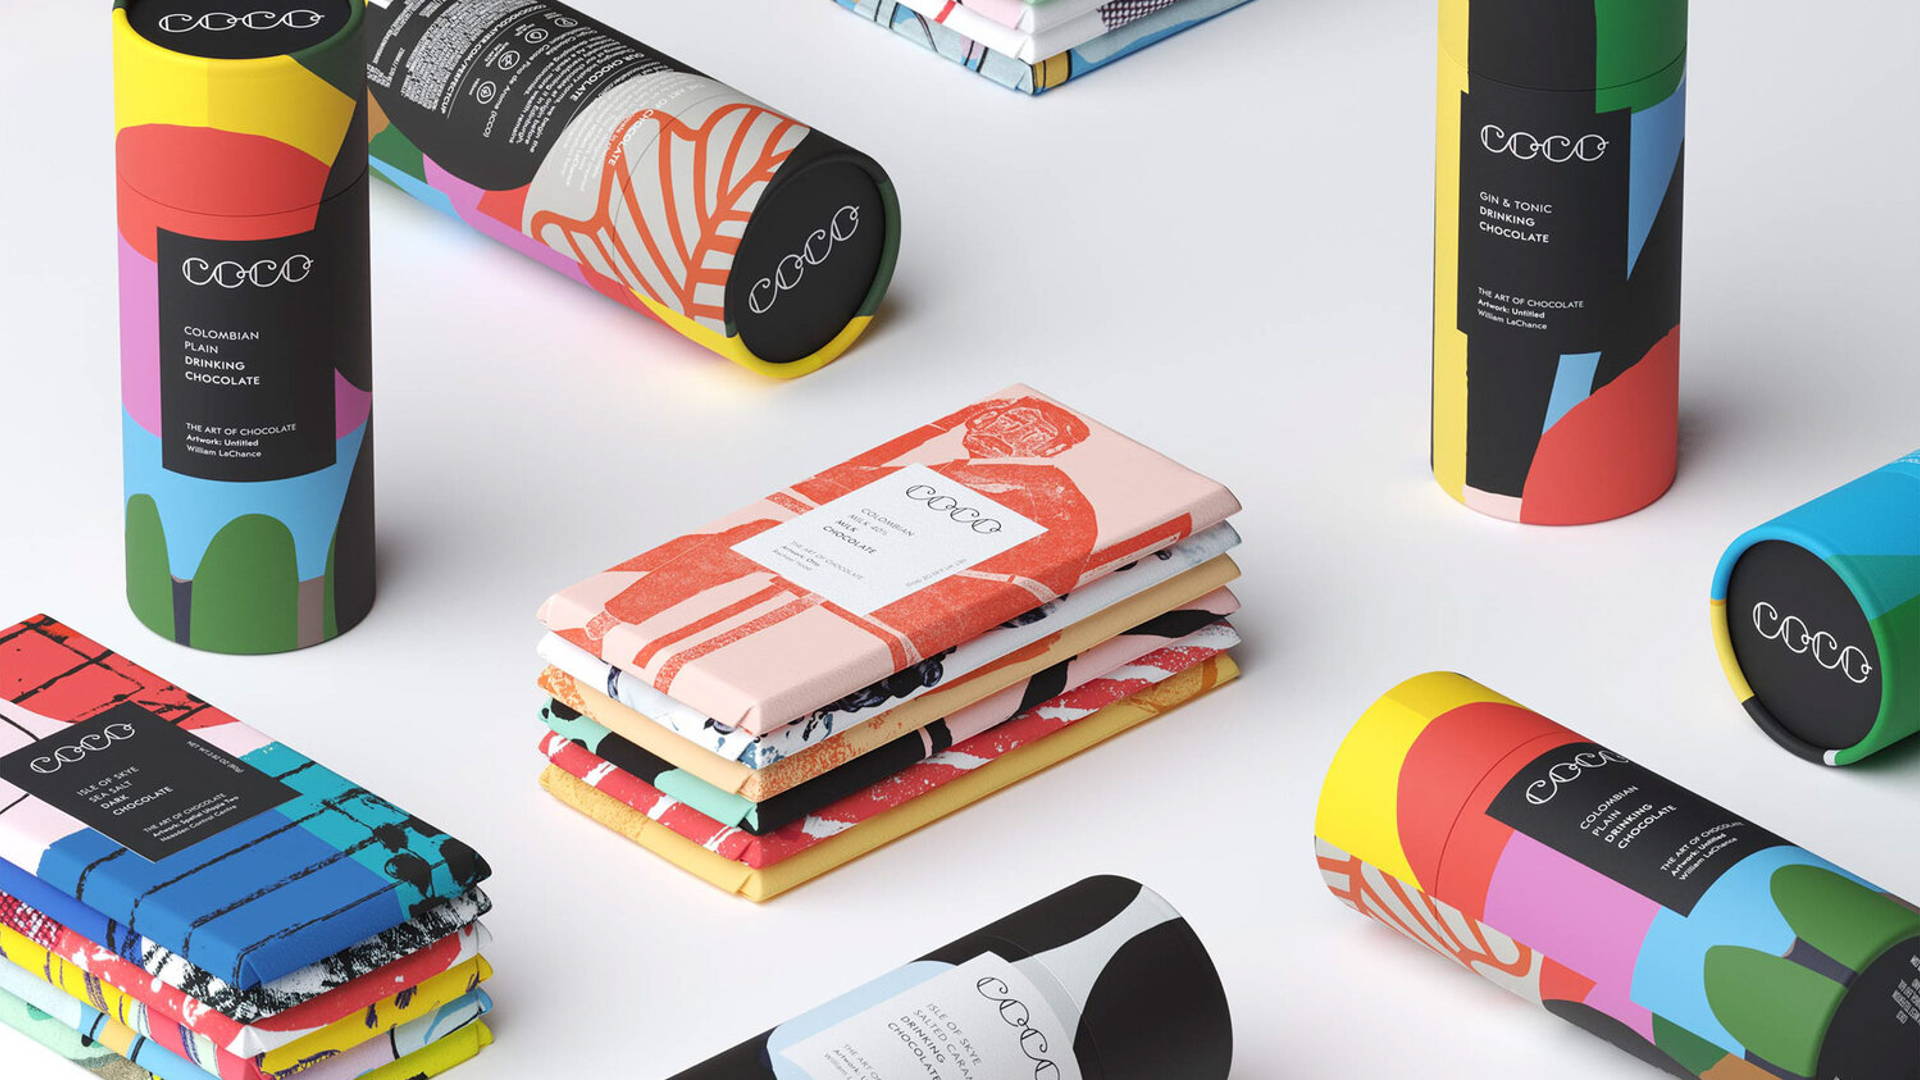 Featured image for Coco's Packaging Design Brings ‘The Art of Chocolate’ To Life